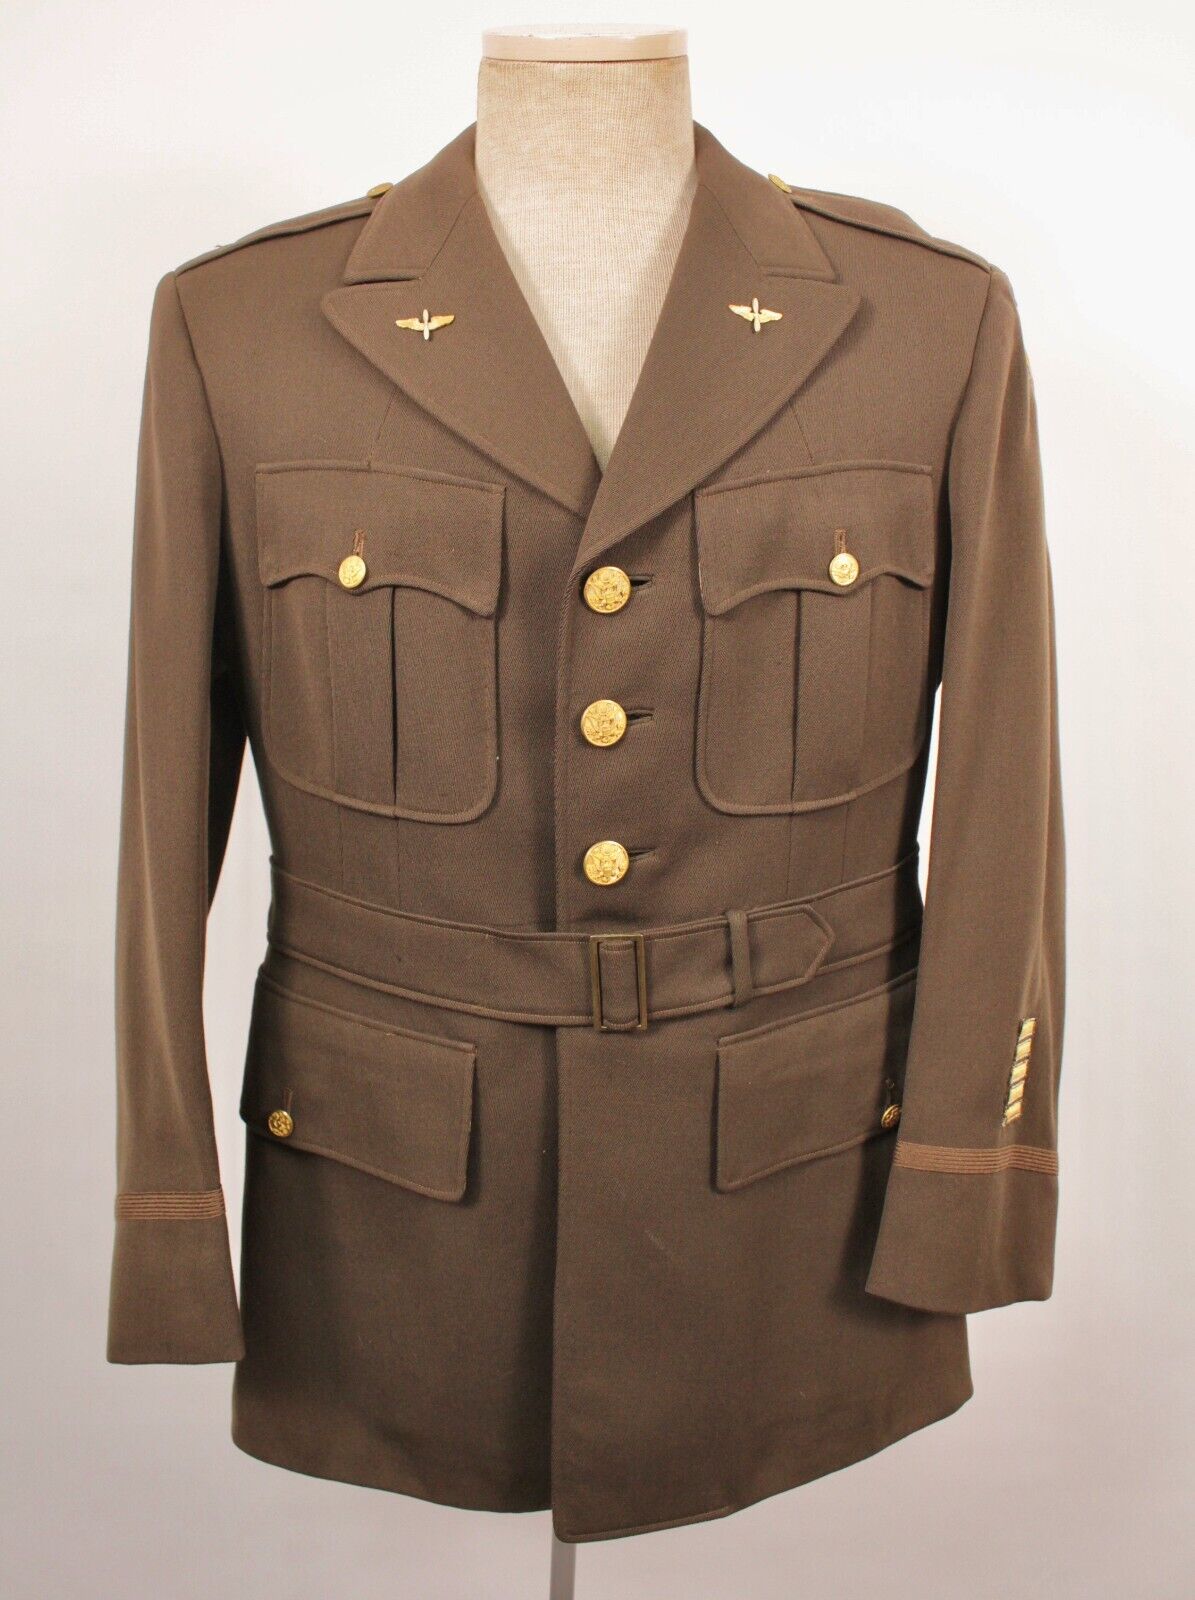 Men's WWII 1940s US Army 6th Air Force Officer's Tunic Uniform Jacket Sz S WW2